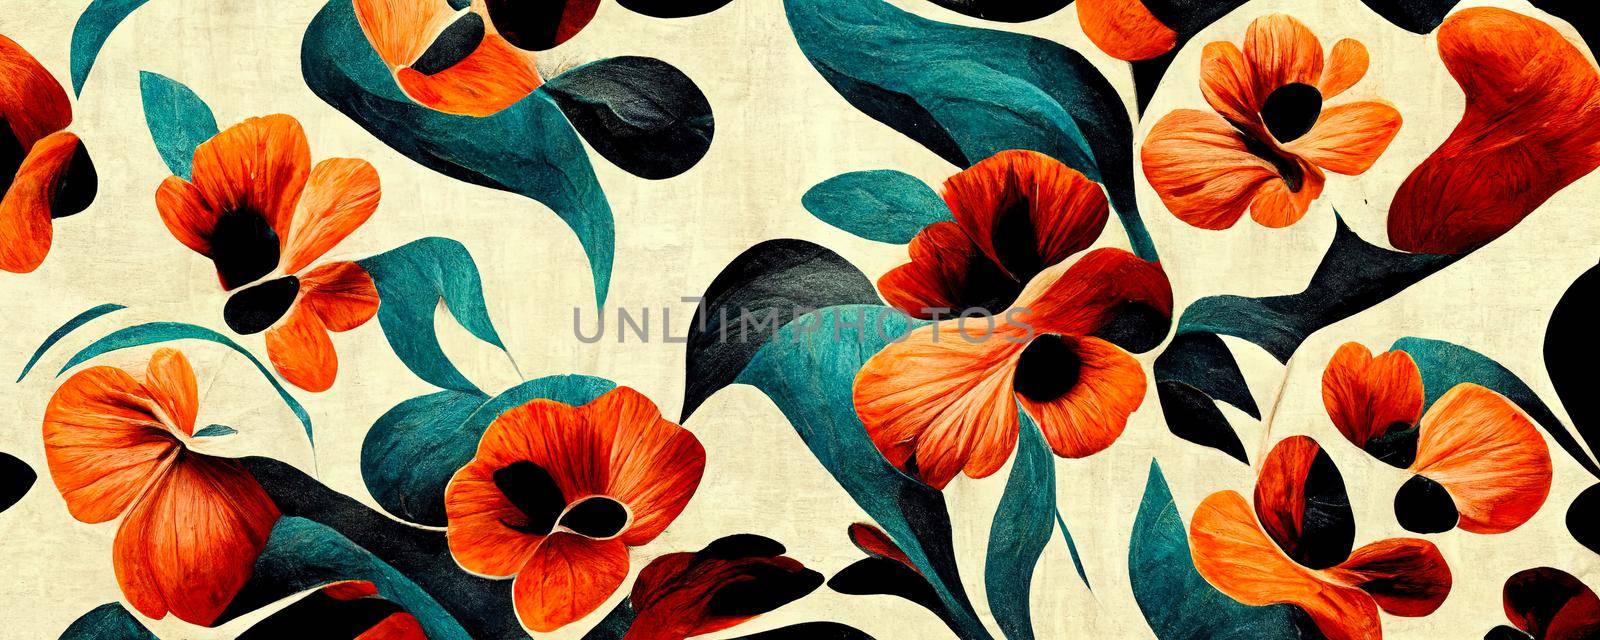 abstract flower illustration, creative flower background, Botanical art by TRMK